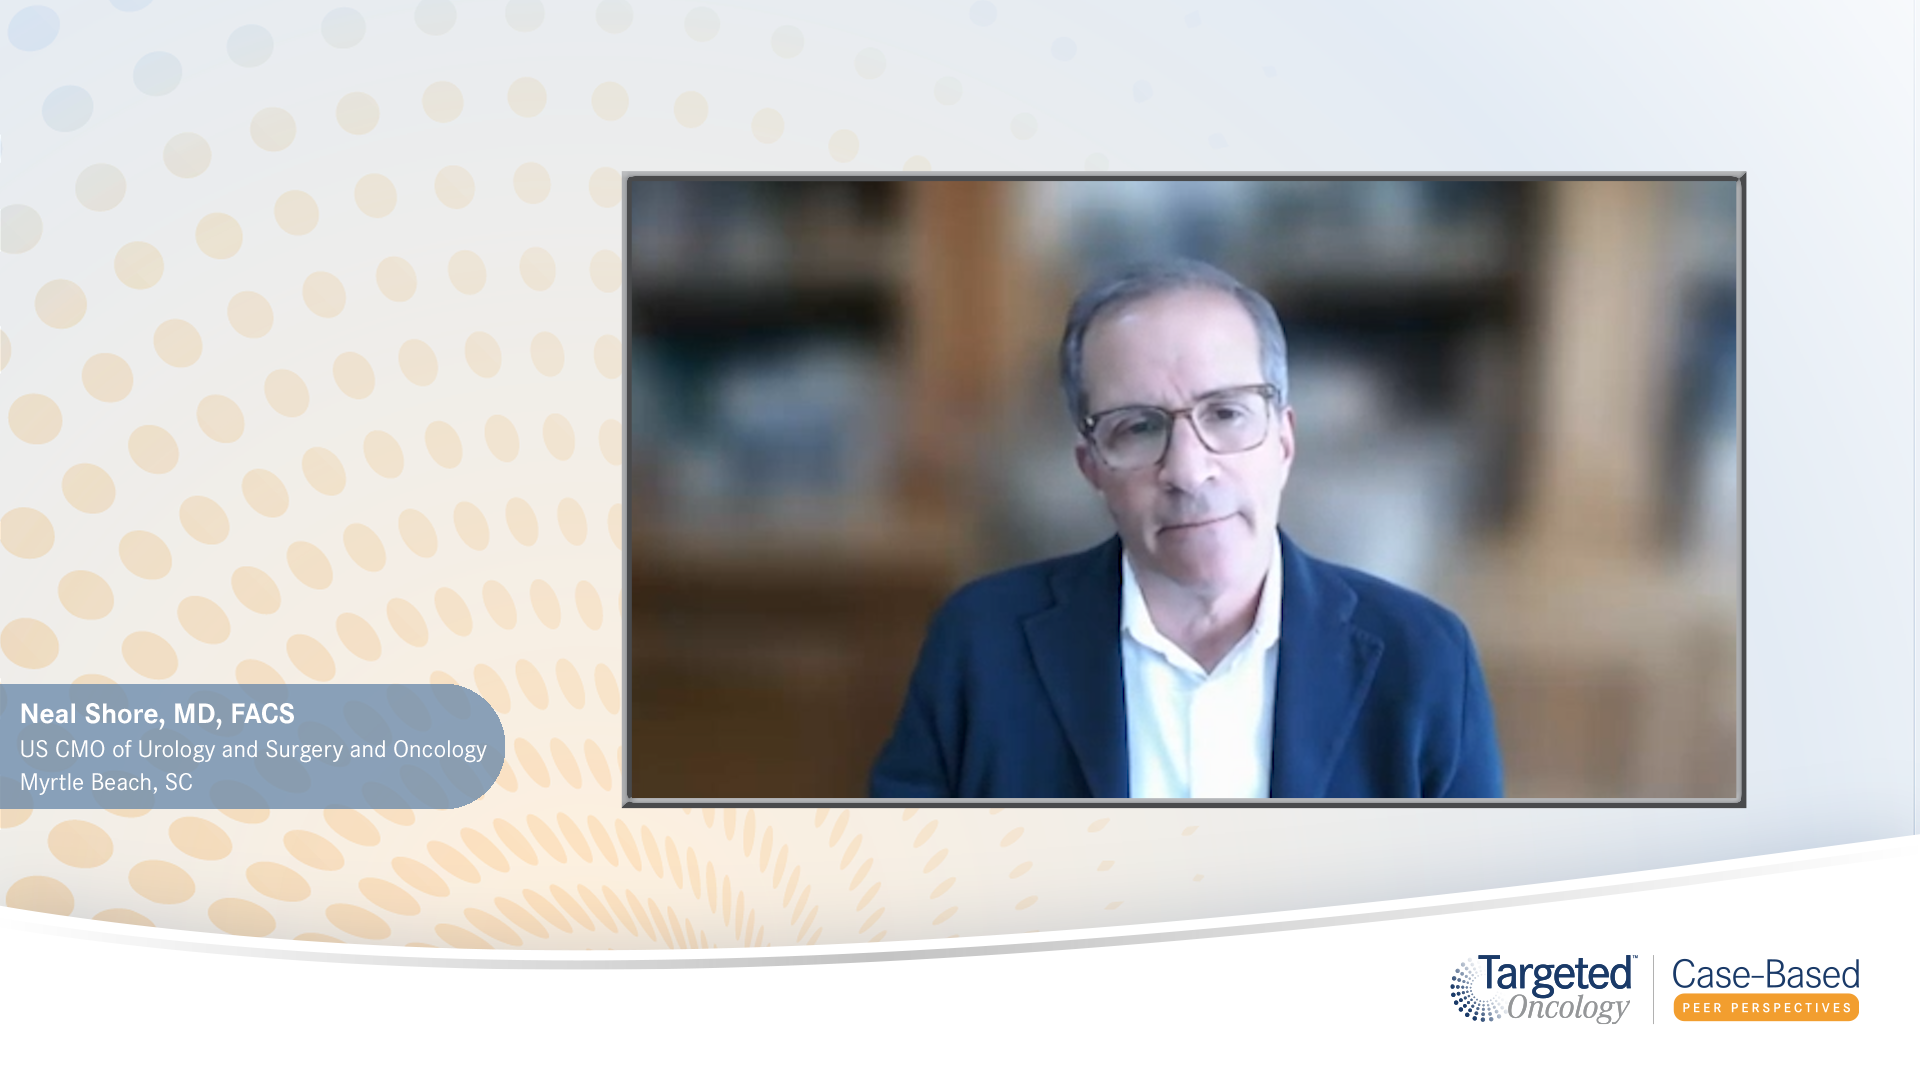 Video 1 - "Overview of a 75-Year-old Patient with Non-Metastatic Castration-Resistant Prostate Cancer’s Case"